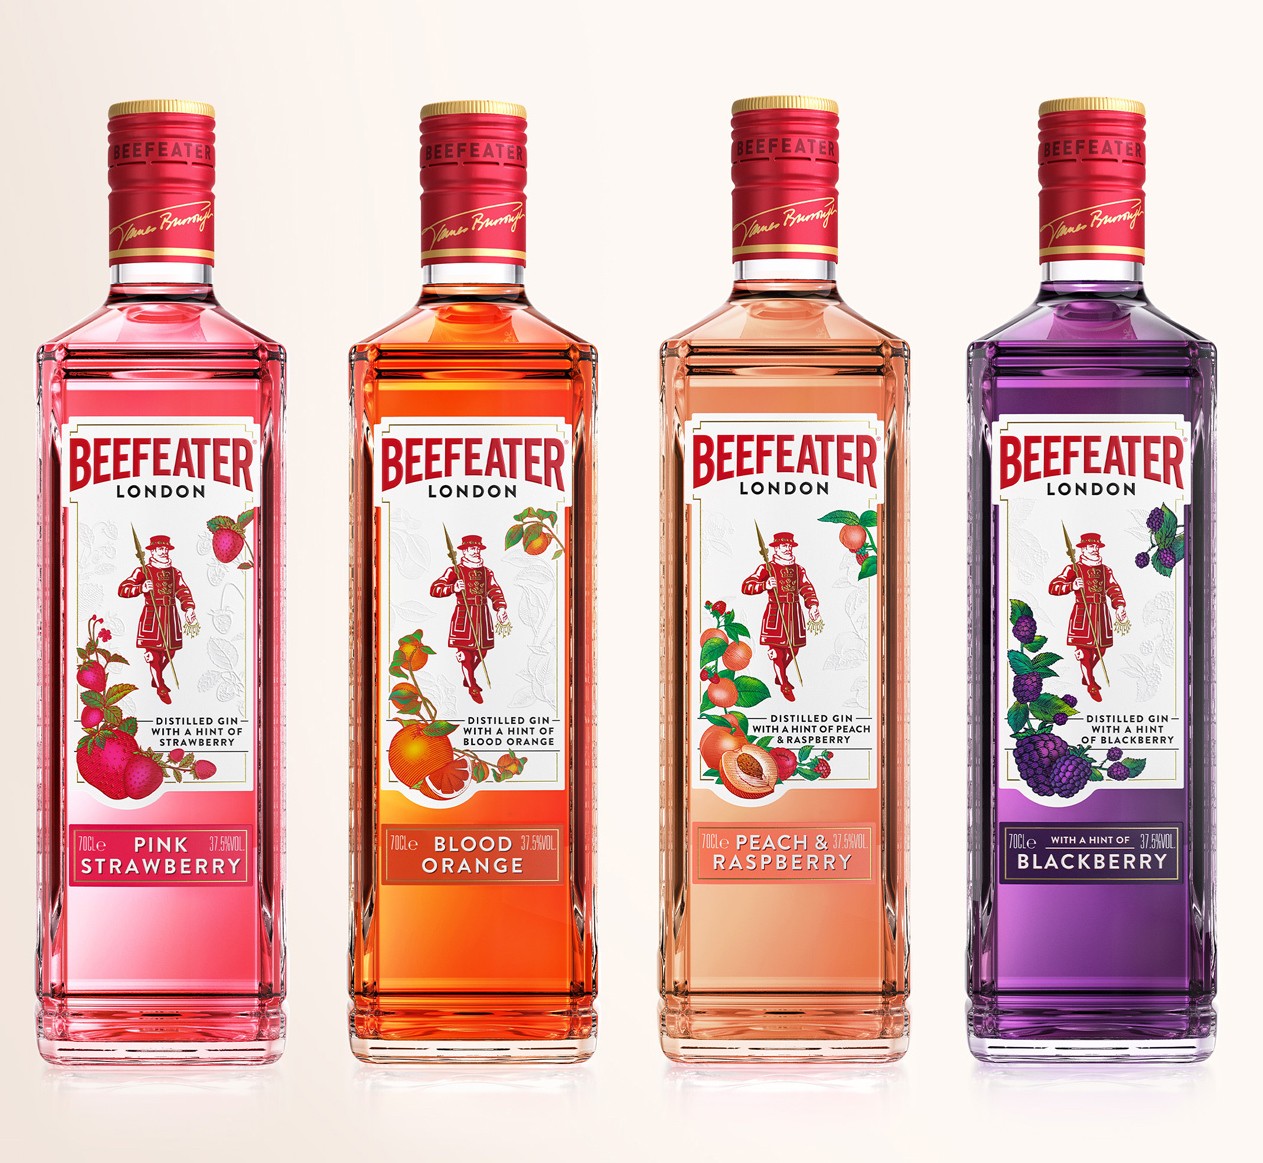 Boundless Brand Design and Beefeater London Re-launch Flavoured Gins